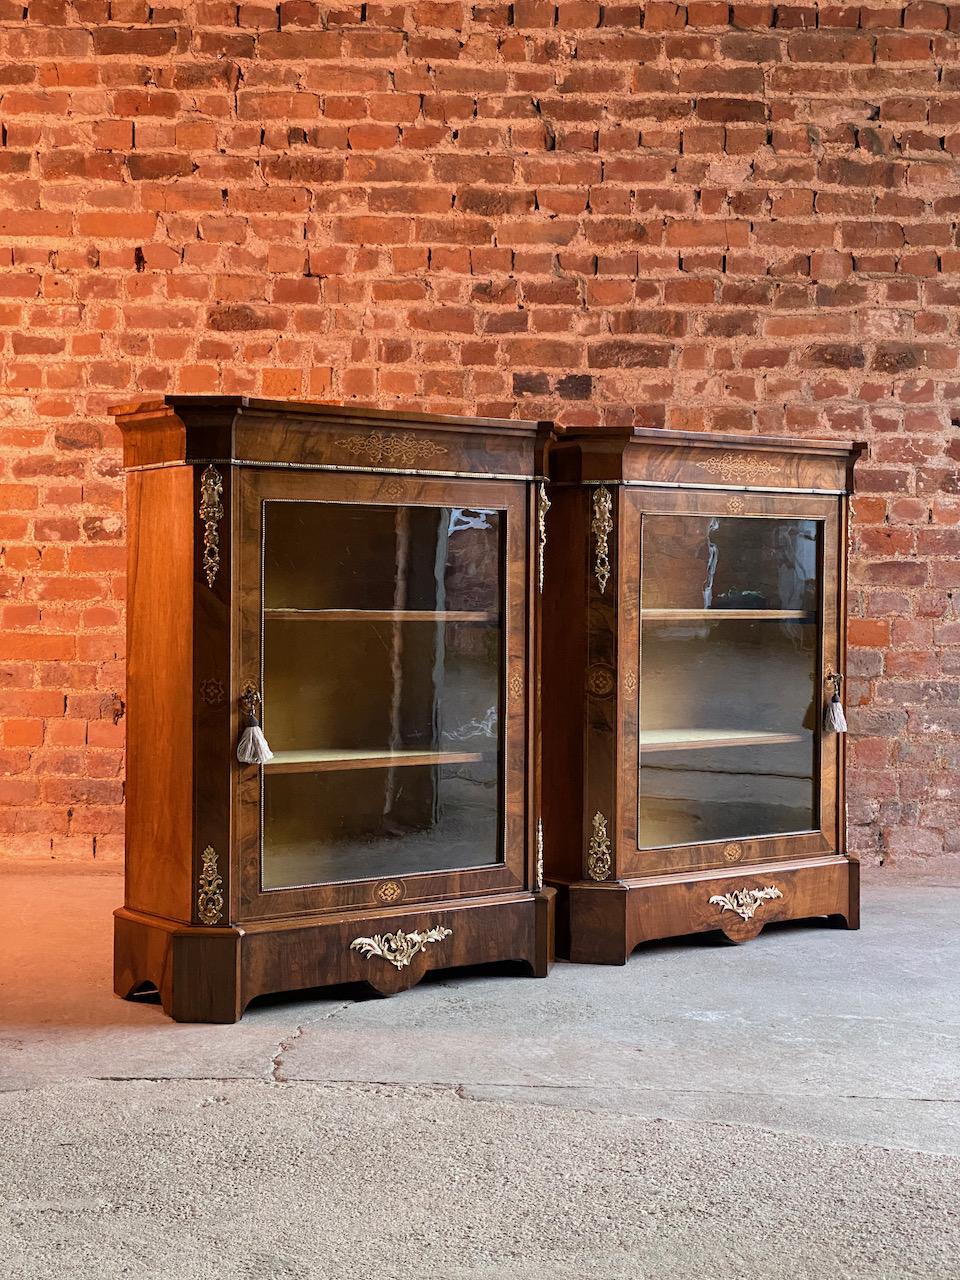 Antique Pair of Walnut Pier Cabinets Victorian, circa 1880 In Good Condition For Sale In Longdon, Tewkesbury